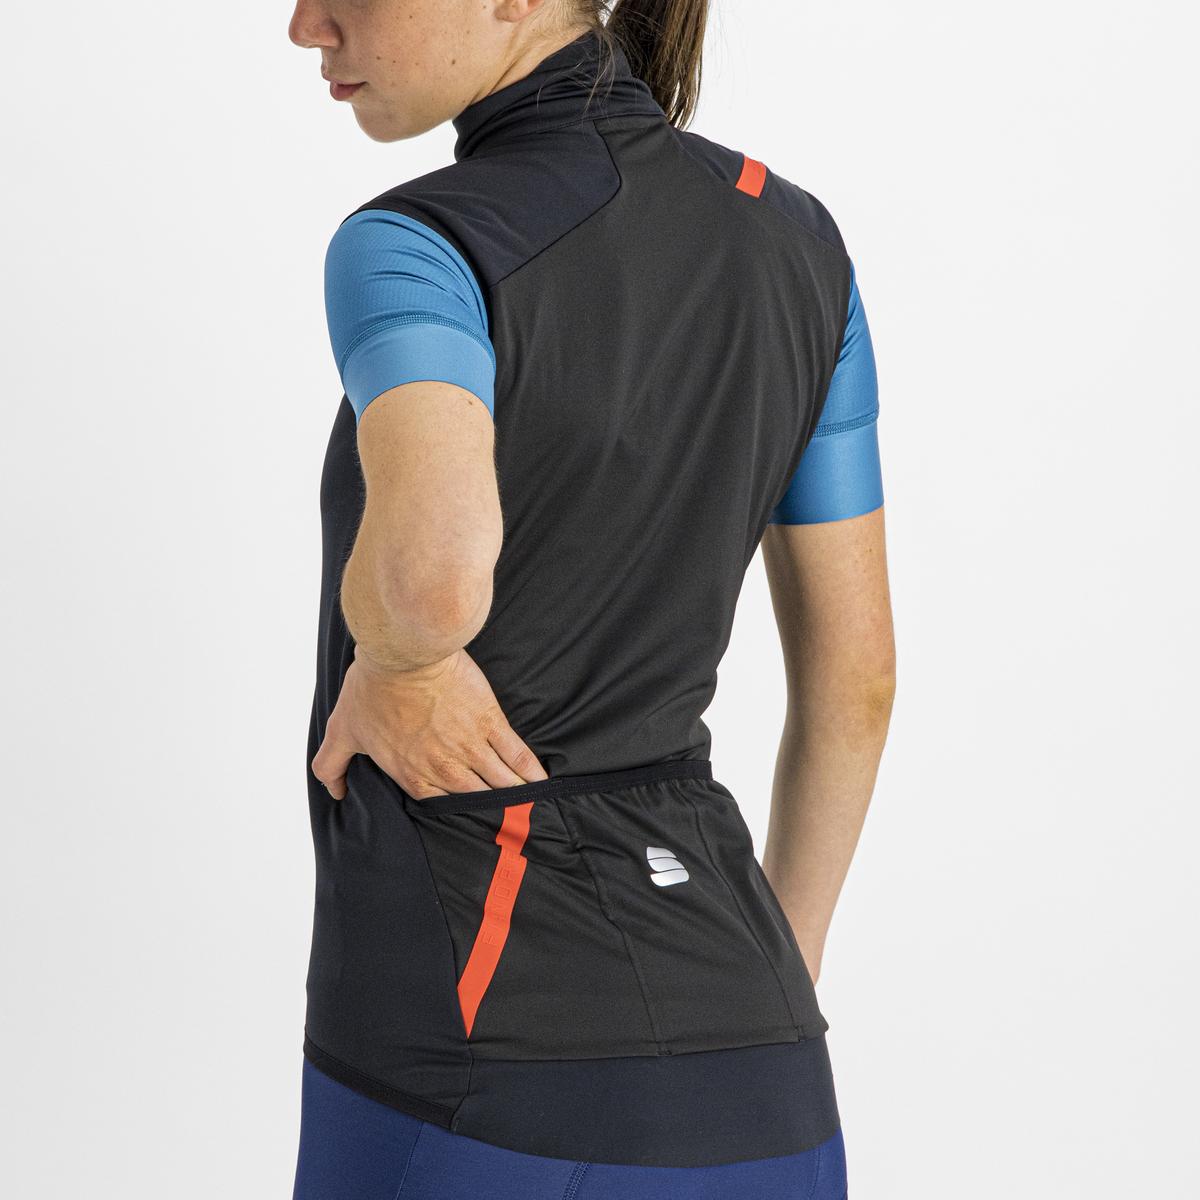 Model with back to camera wearing the Sportful Fiandre Light NoRain Vest